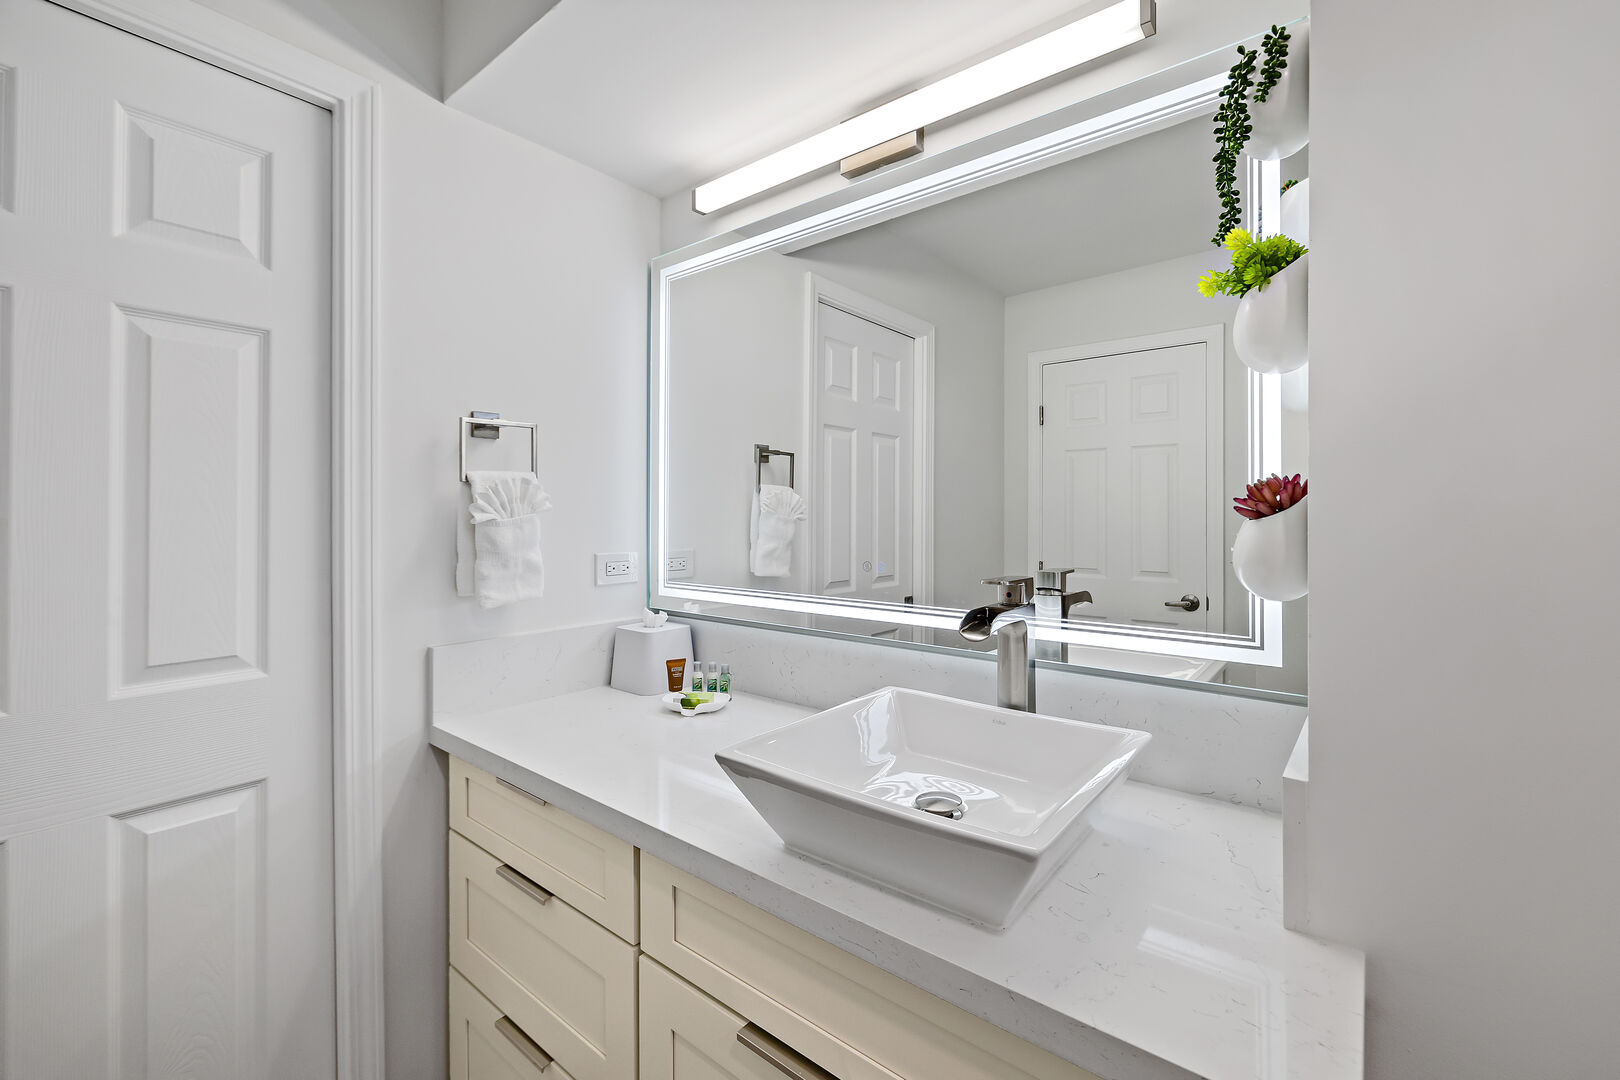 Full bathroom with vanity and cabinet